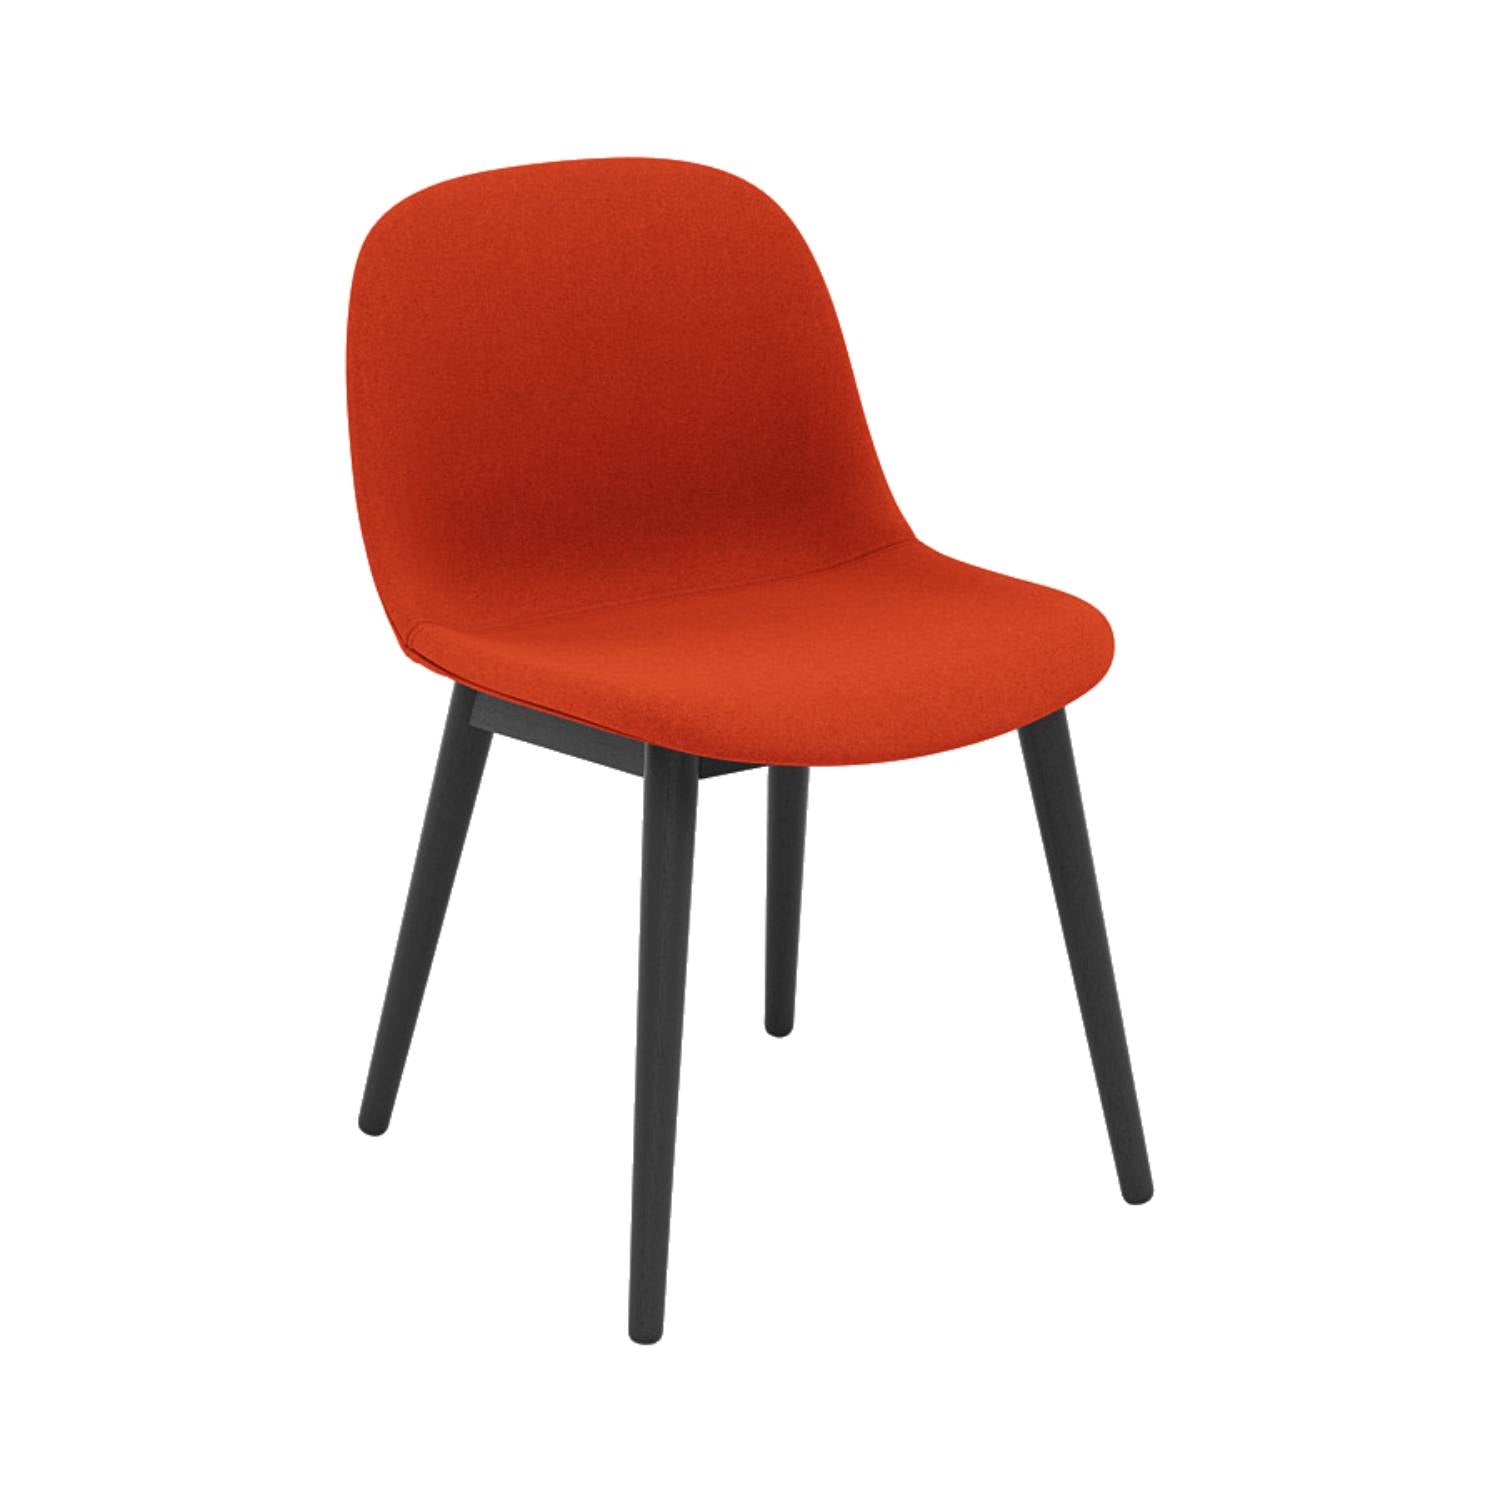 Fiber Side Chair: Wood Base + Recycled Shell + Upholstered +  Black